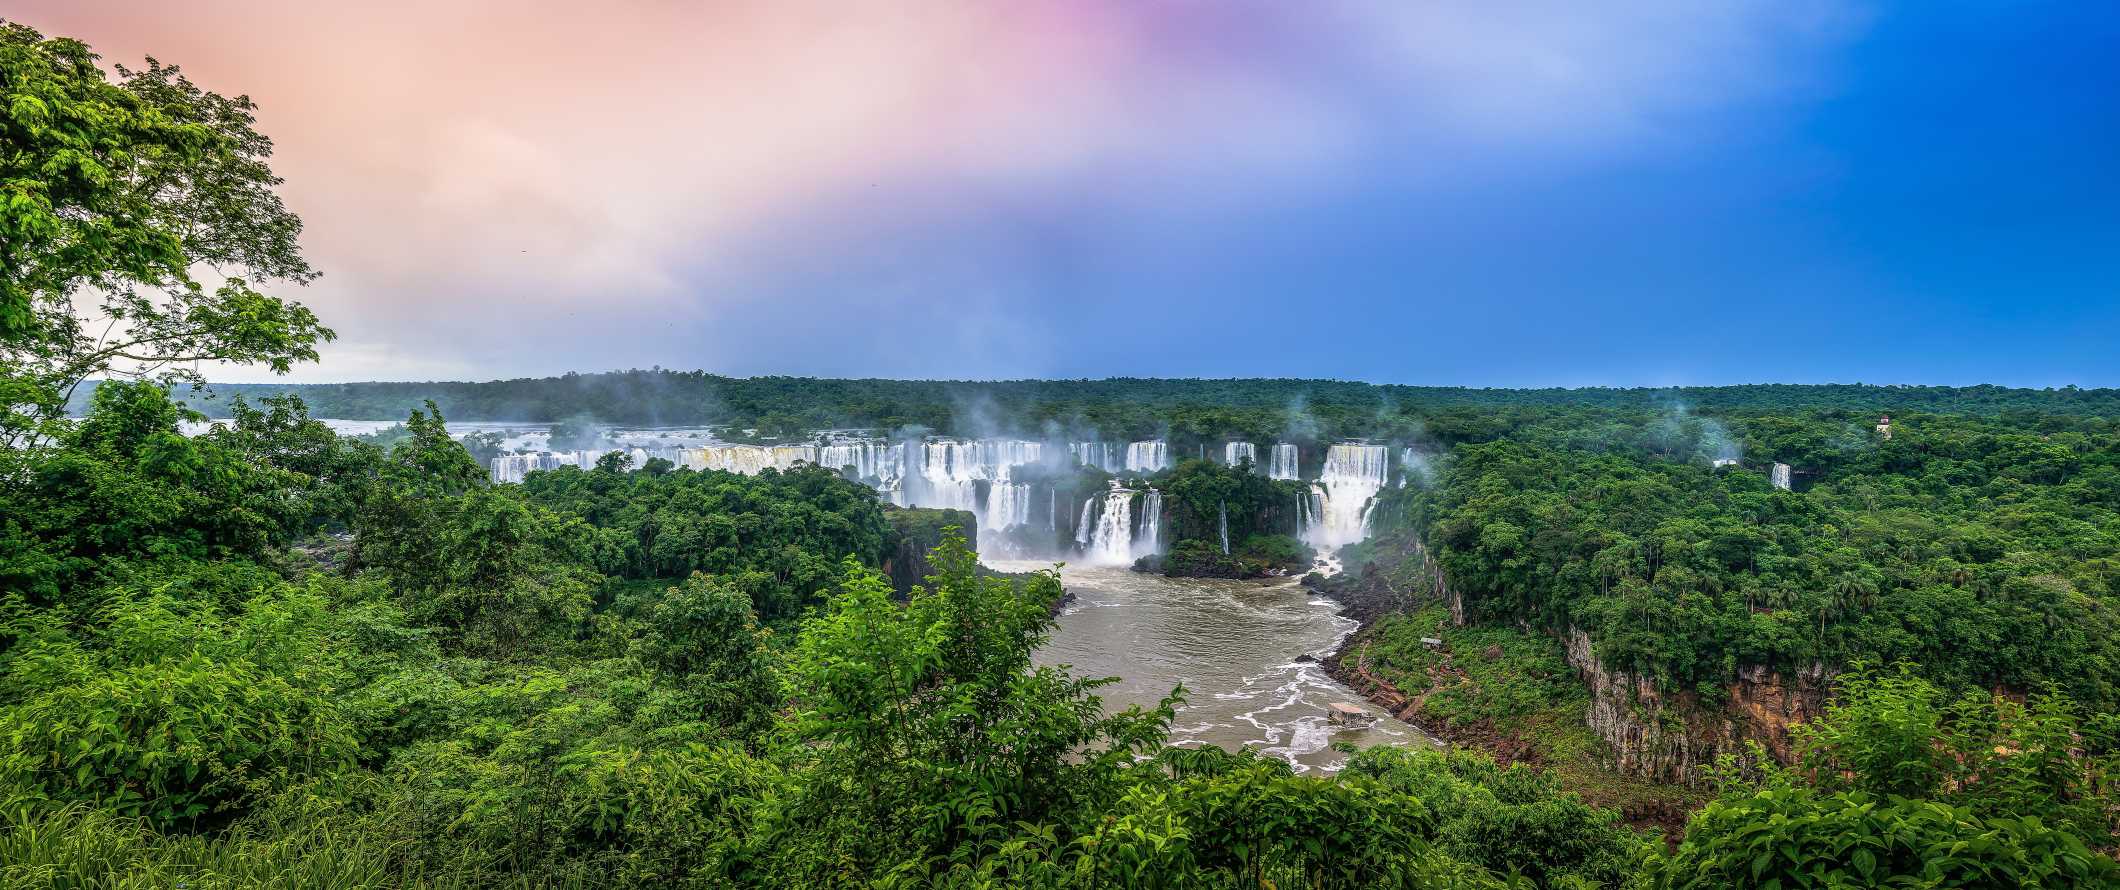 The expansive Iguazu Falls in Brazil within the lush rainforest at sunset